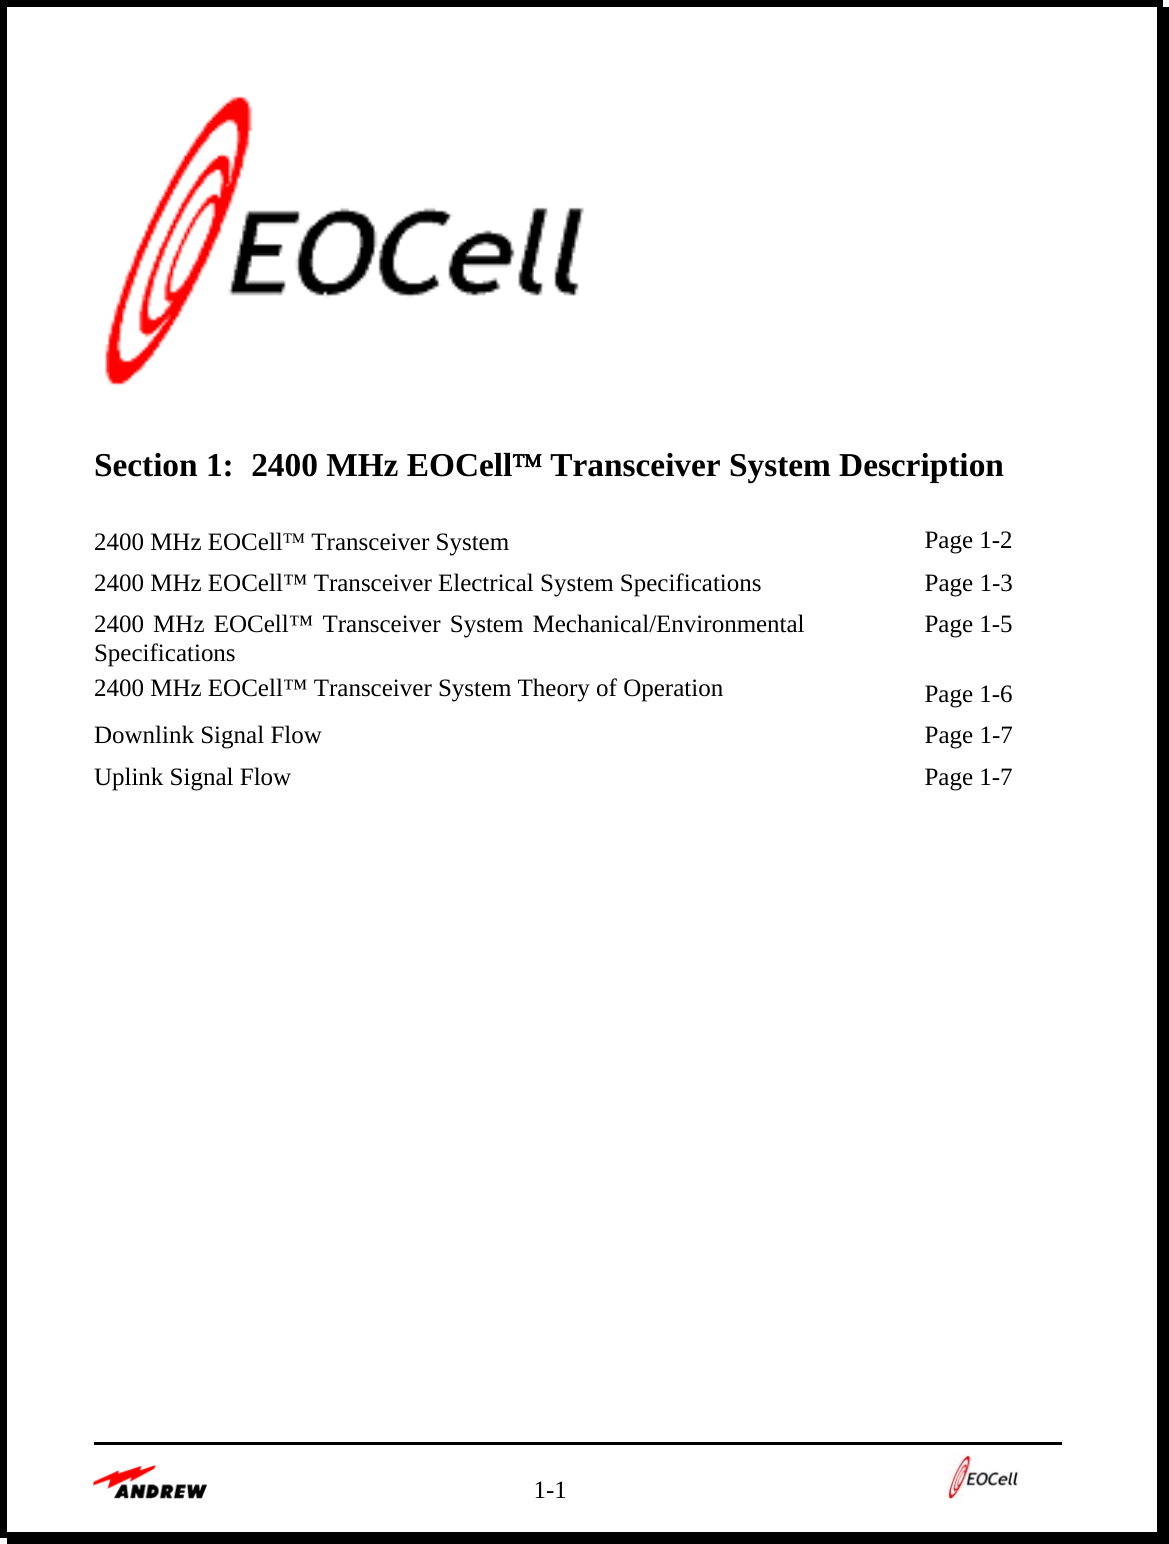   1-1      Section 1:  2400 MHz EOCell™ Transceiver System Description  2400 MHz EOCell™ Transceiver System    Page 1-2 2400 MHz EOCell™ Transceiver Electrical System Specifications    Page 1-3 2400 MHz EOCell™ Transceiver System Mechanical/Environmental Specifications   Page 1-5 2400 MHz EOCell™ Transceiver System Theory of Operation   Page 1-6 Downlink Signal Flow    Page 1-7 Uplink Signal Flow    Page 1-7              